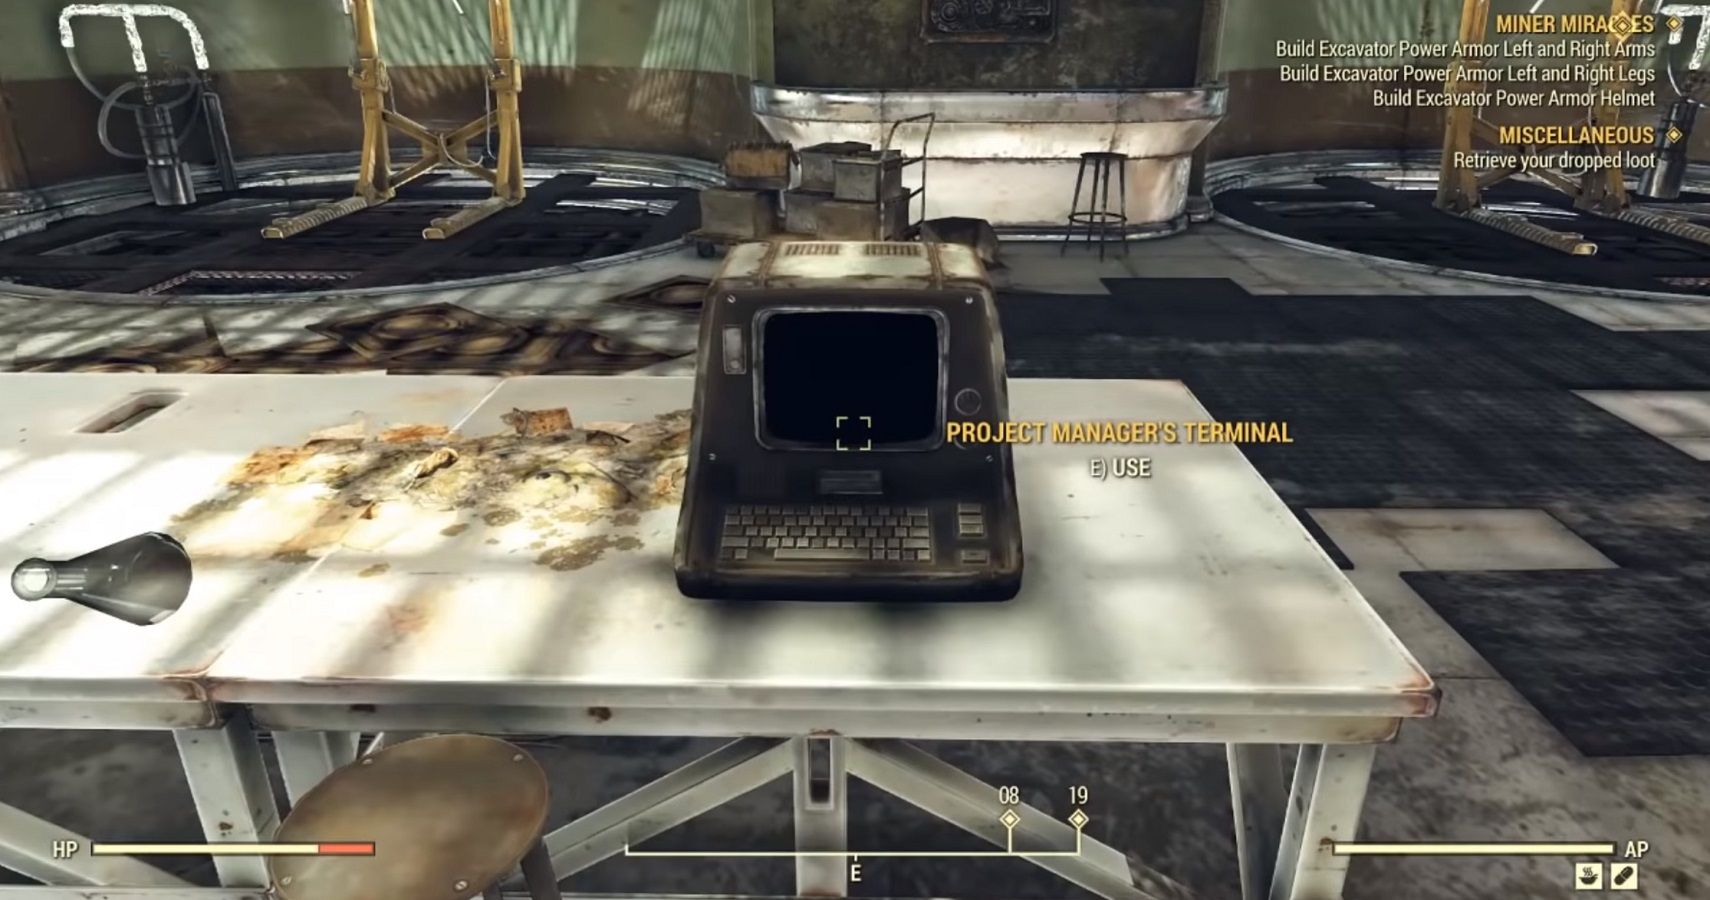 fallout 76 interacting with the Project Manager's Terminal in Fallout 76